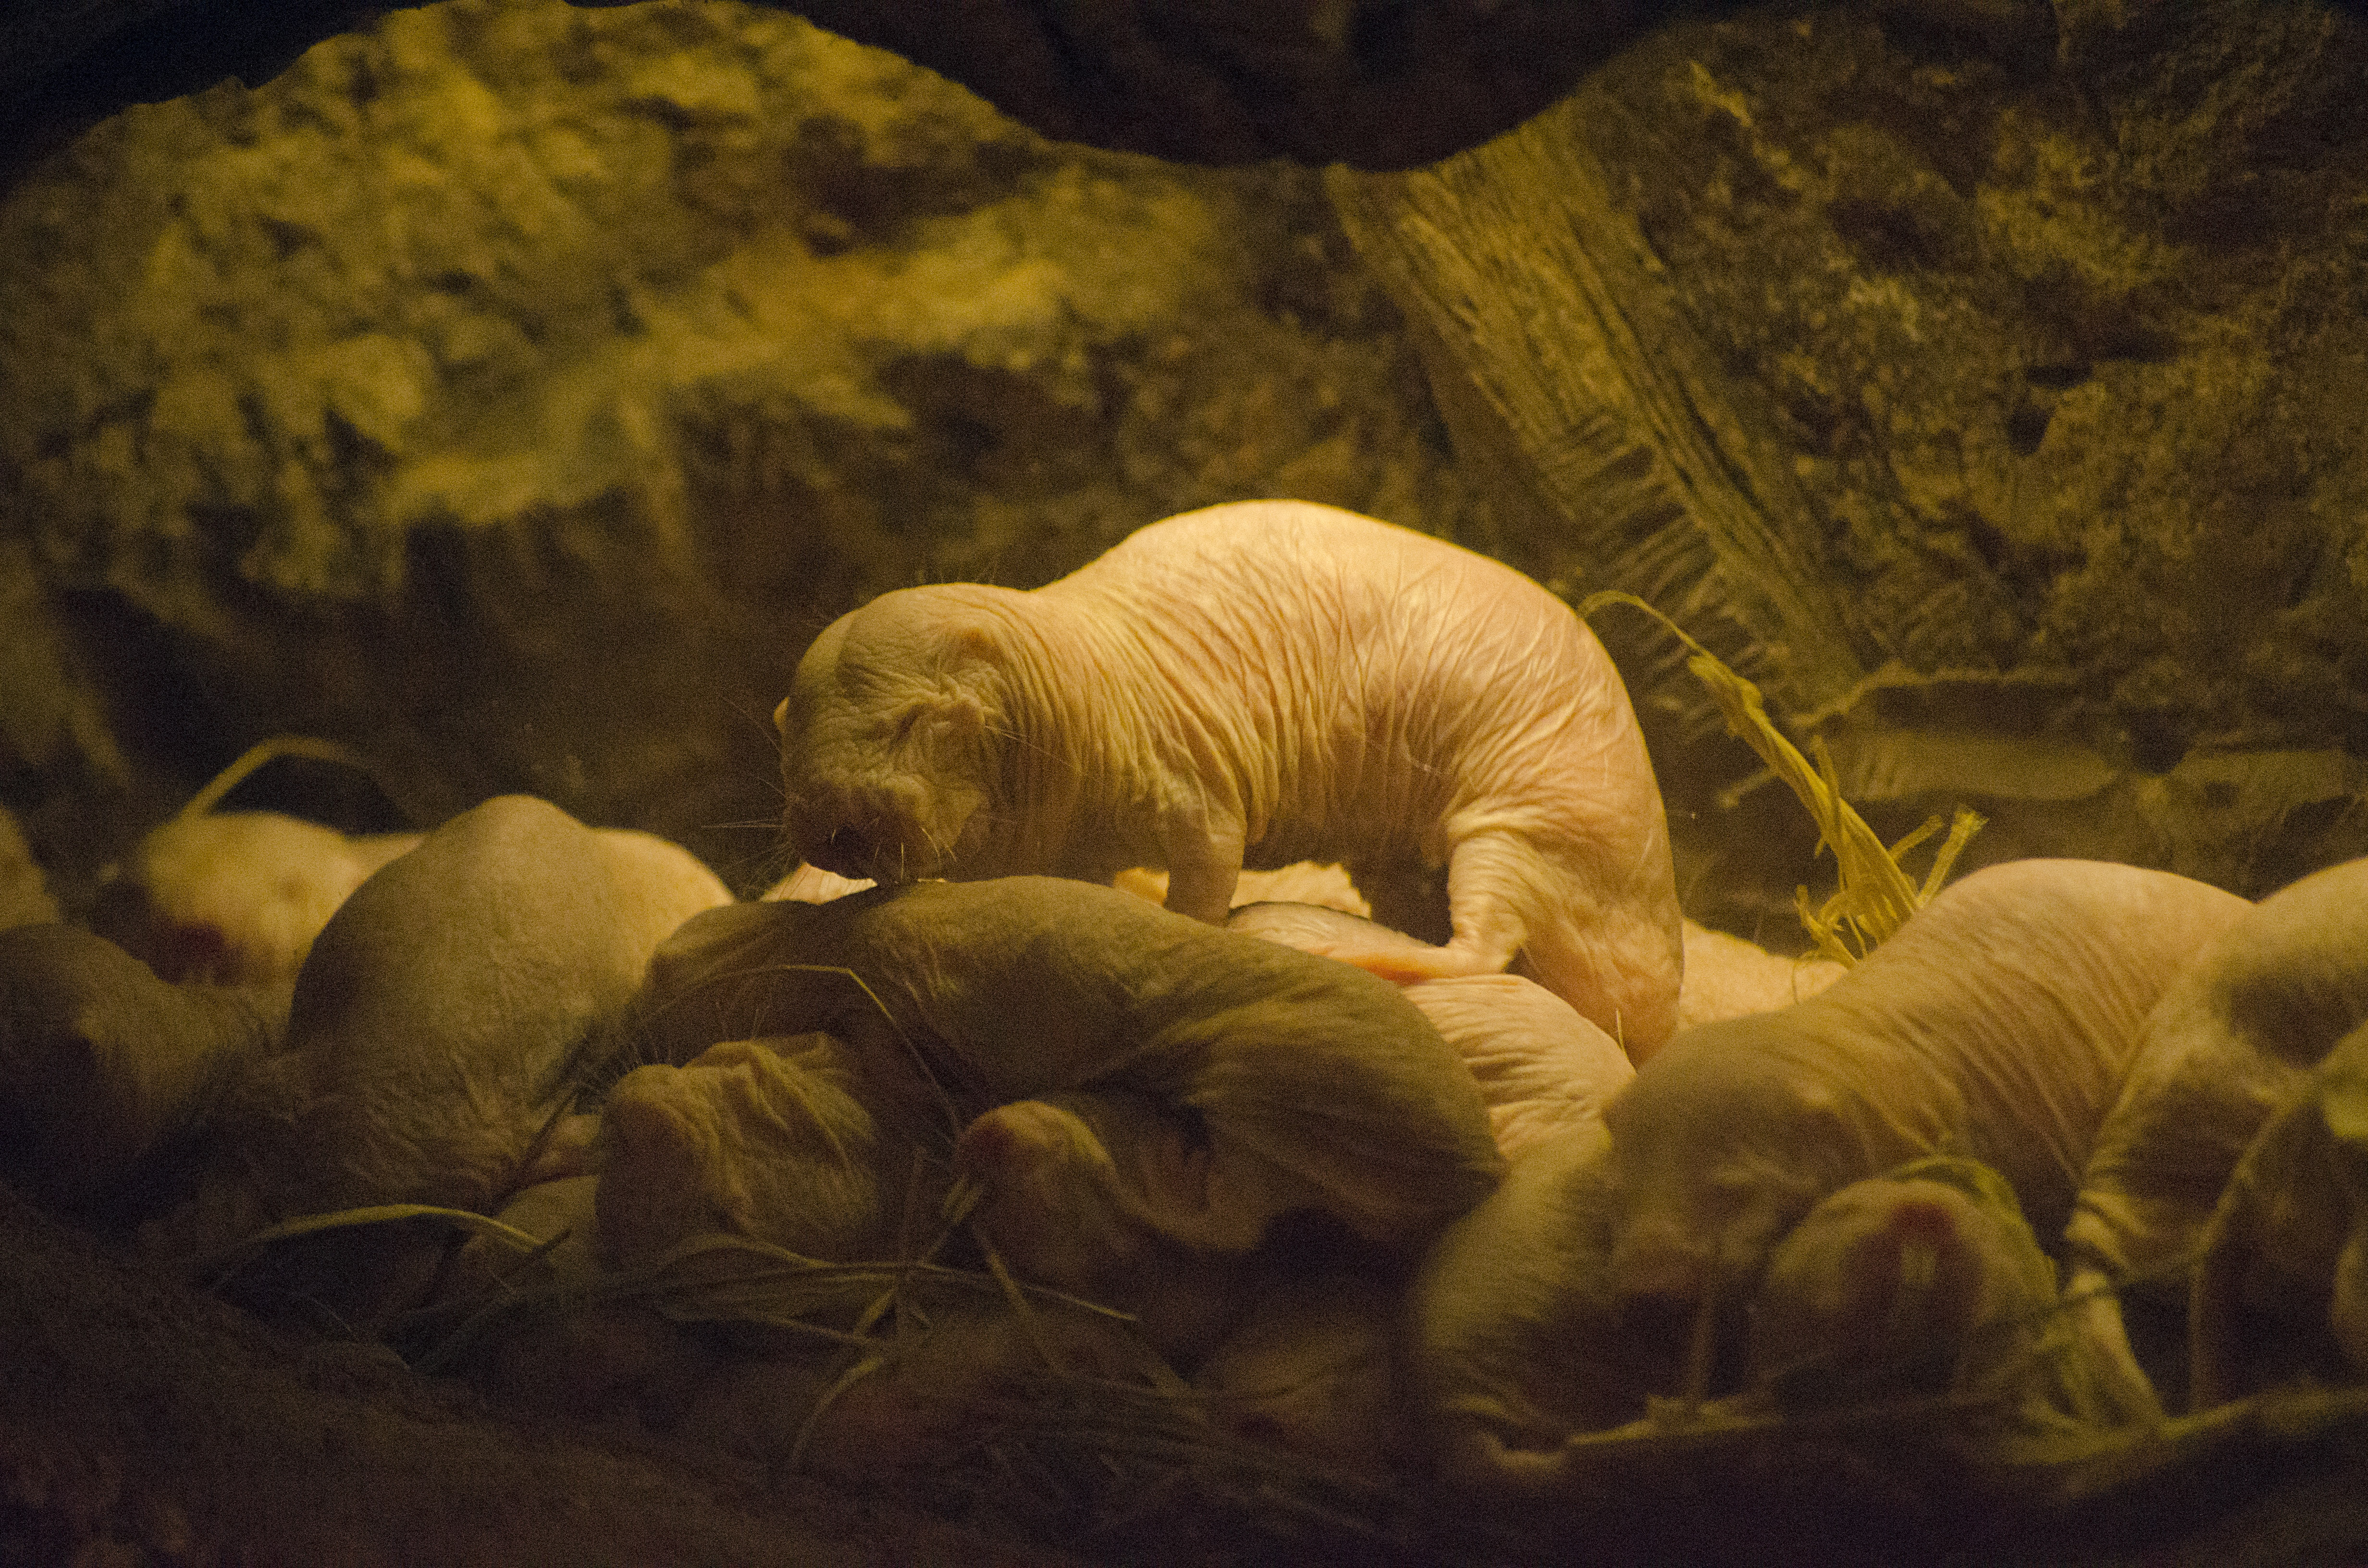 Do naked mole rats hold the answers to cancer prevention and aging?